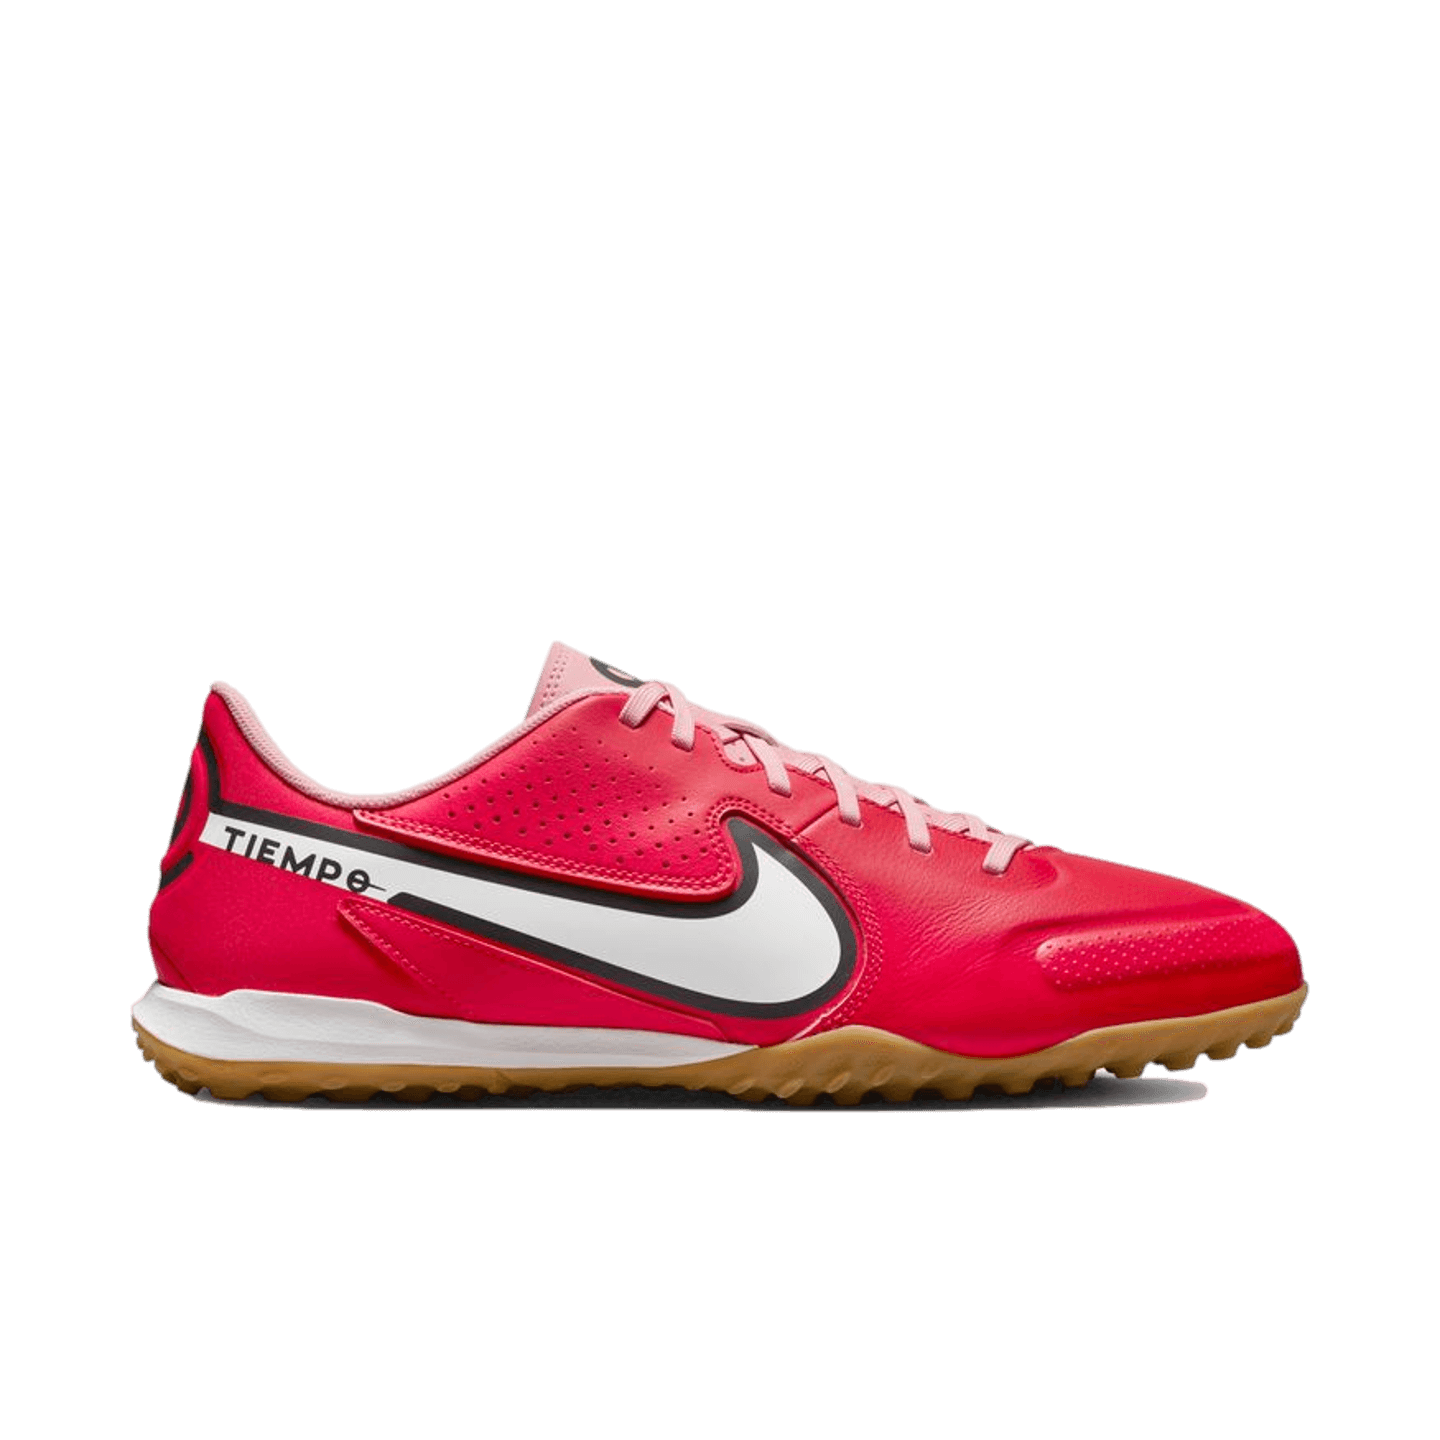 Nike Tiempo Legend 9 Academy Turf Soccer Shoes - Red